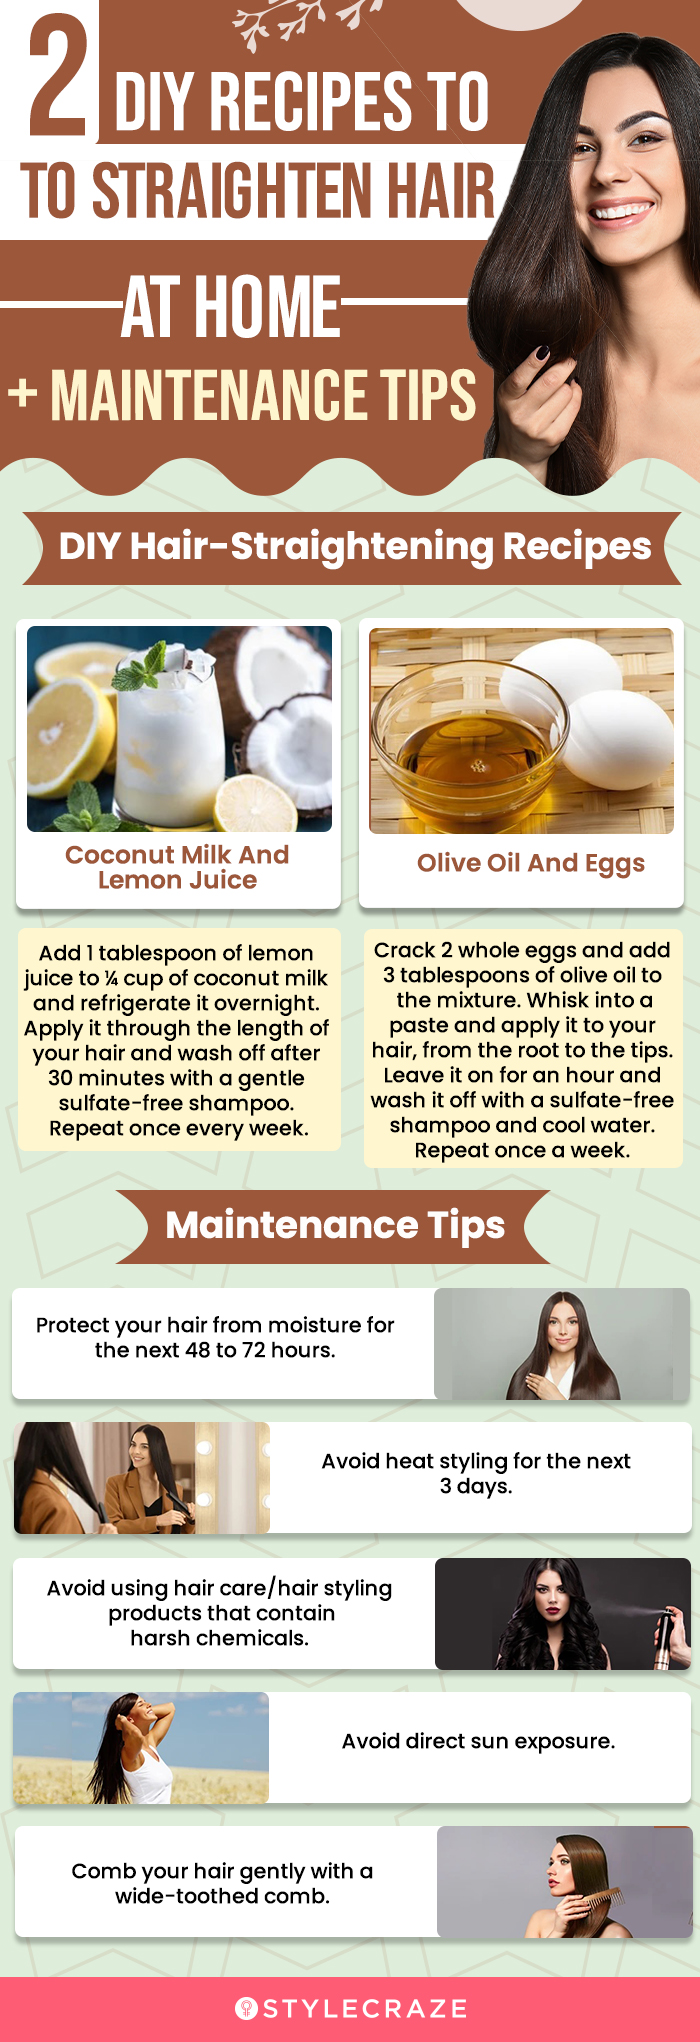 2 diy recipes to straighten hair at home + maintenance tips (infographic)